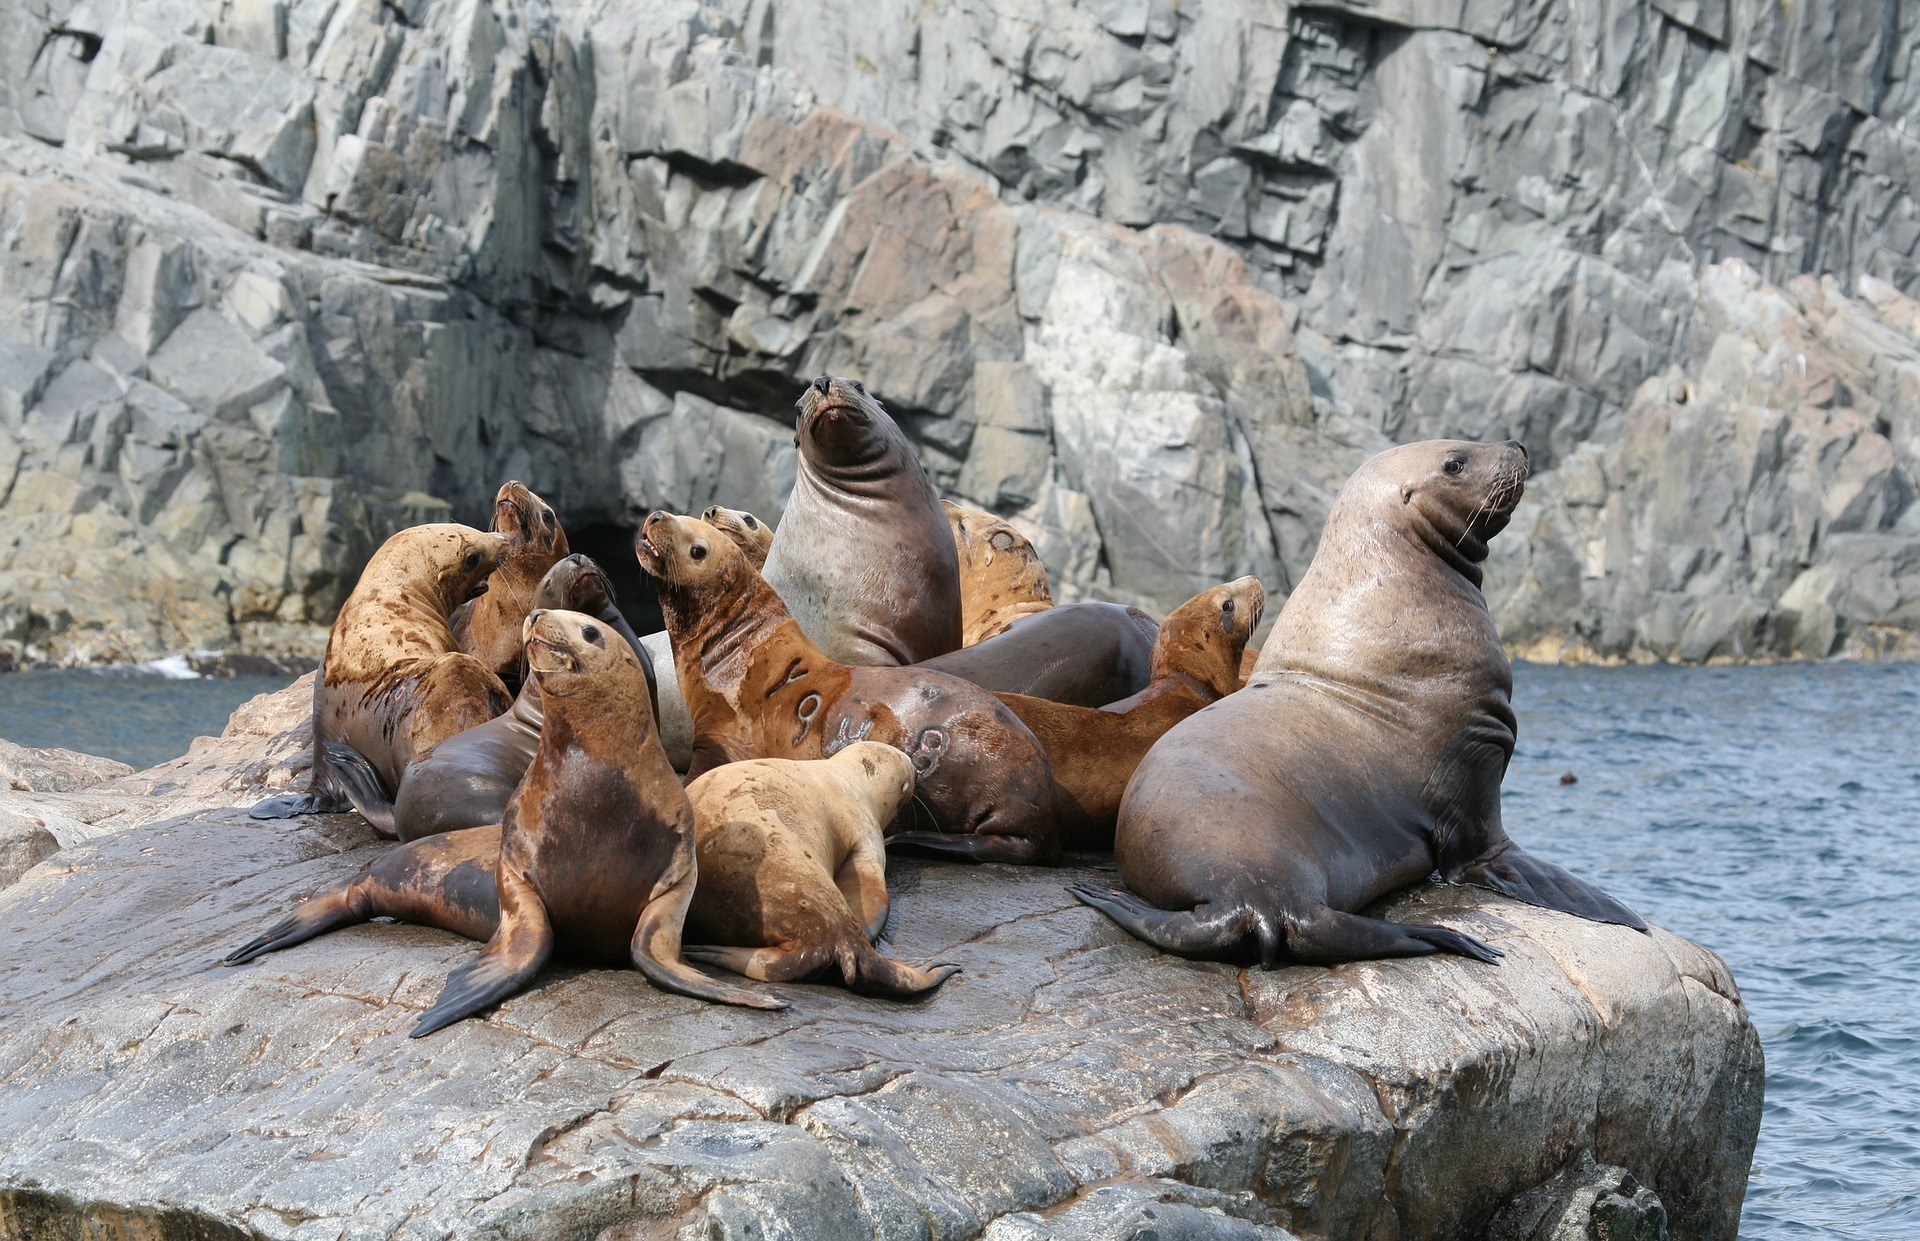 There are a large number of extant pinnipeds